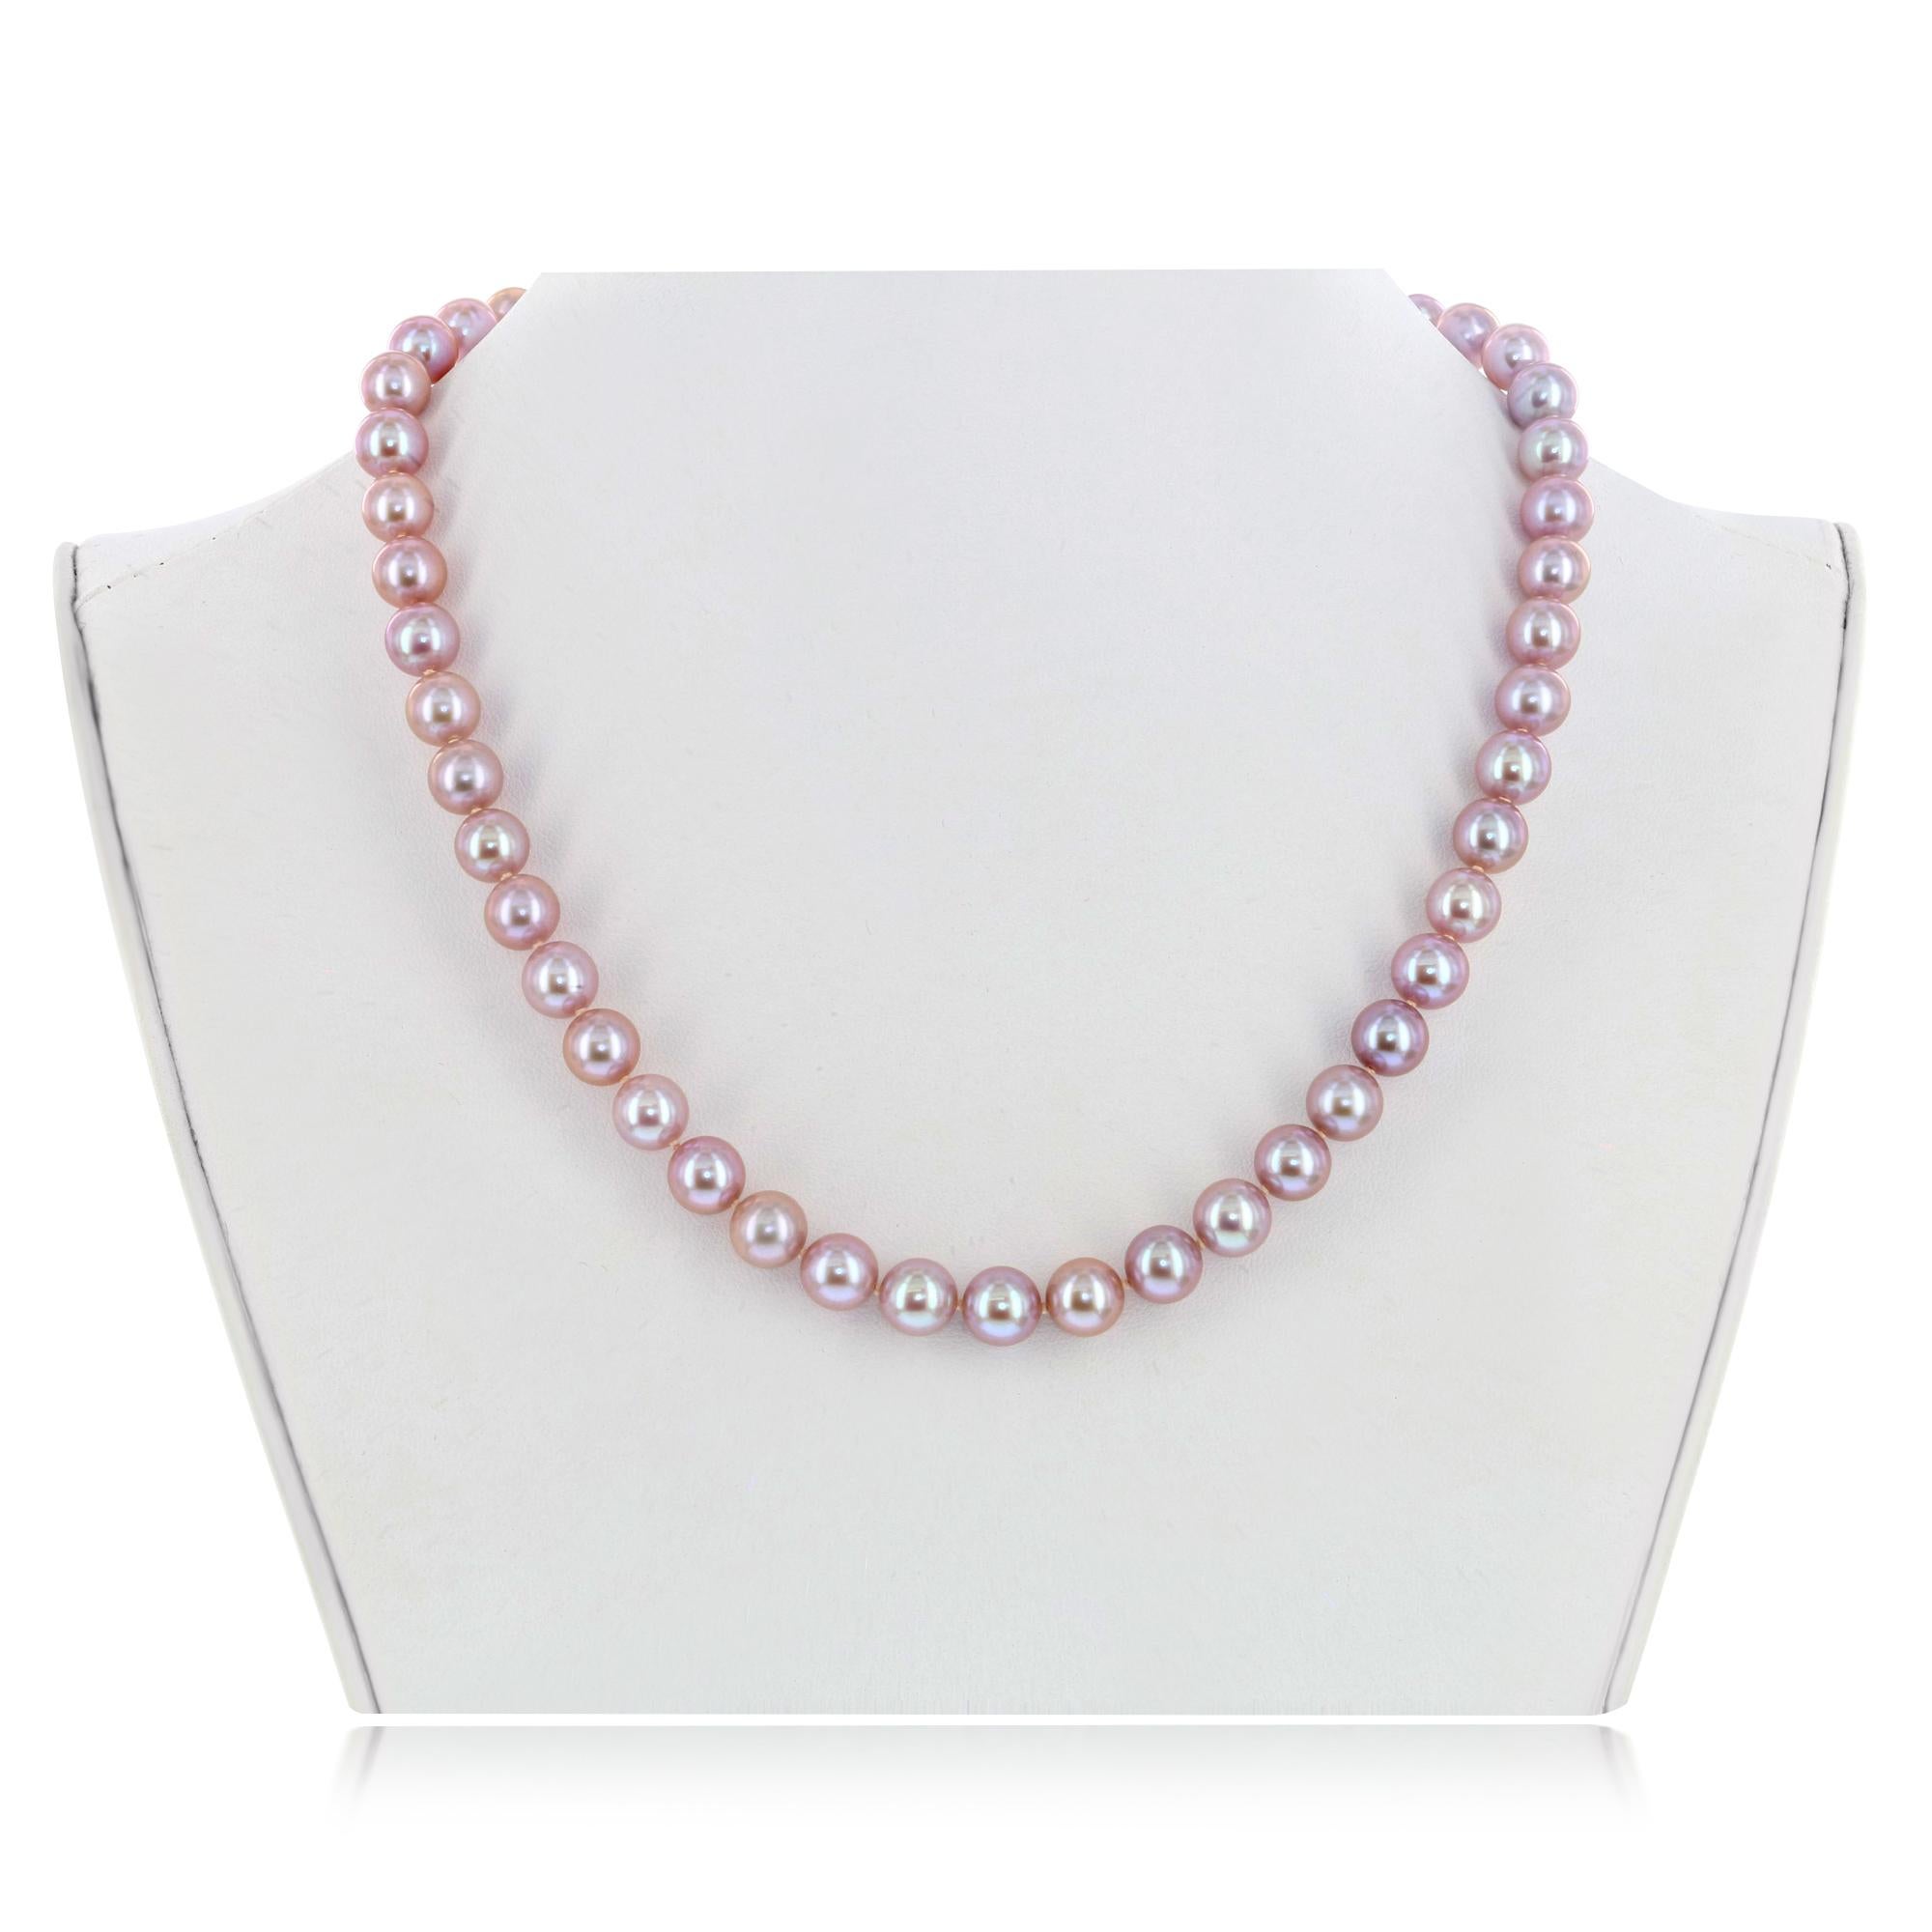 This exquisite Chinese freshwater cultured pearl necklace features distinctive, lustrous, natural color pink round pearls measuring 7.5-8mm. The necklace is strung with a classic 14K white gold filigree clasp.
This necklace makes the perfect